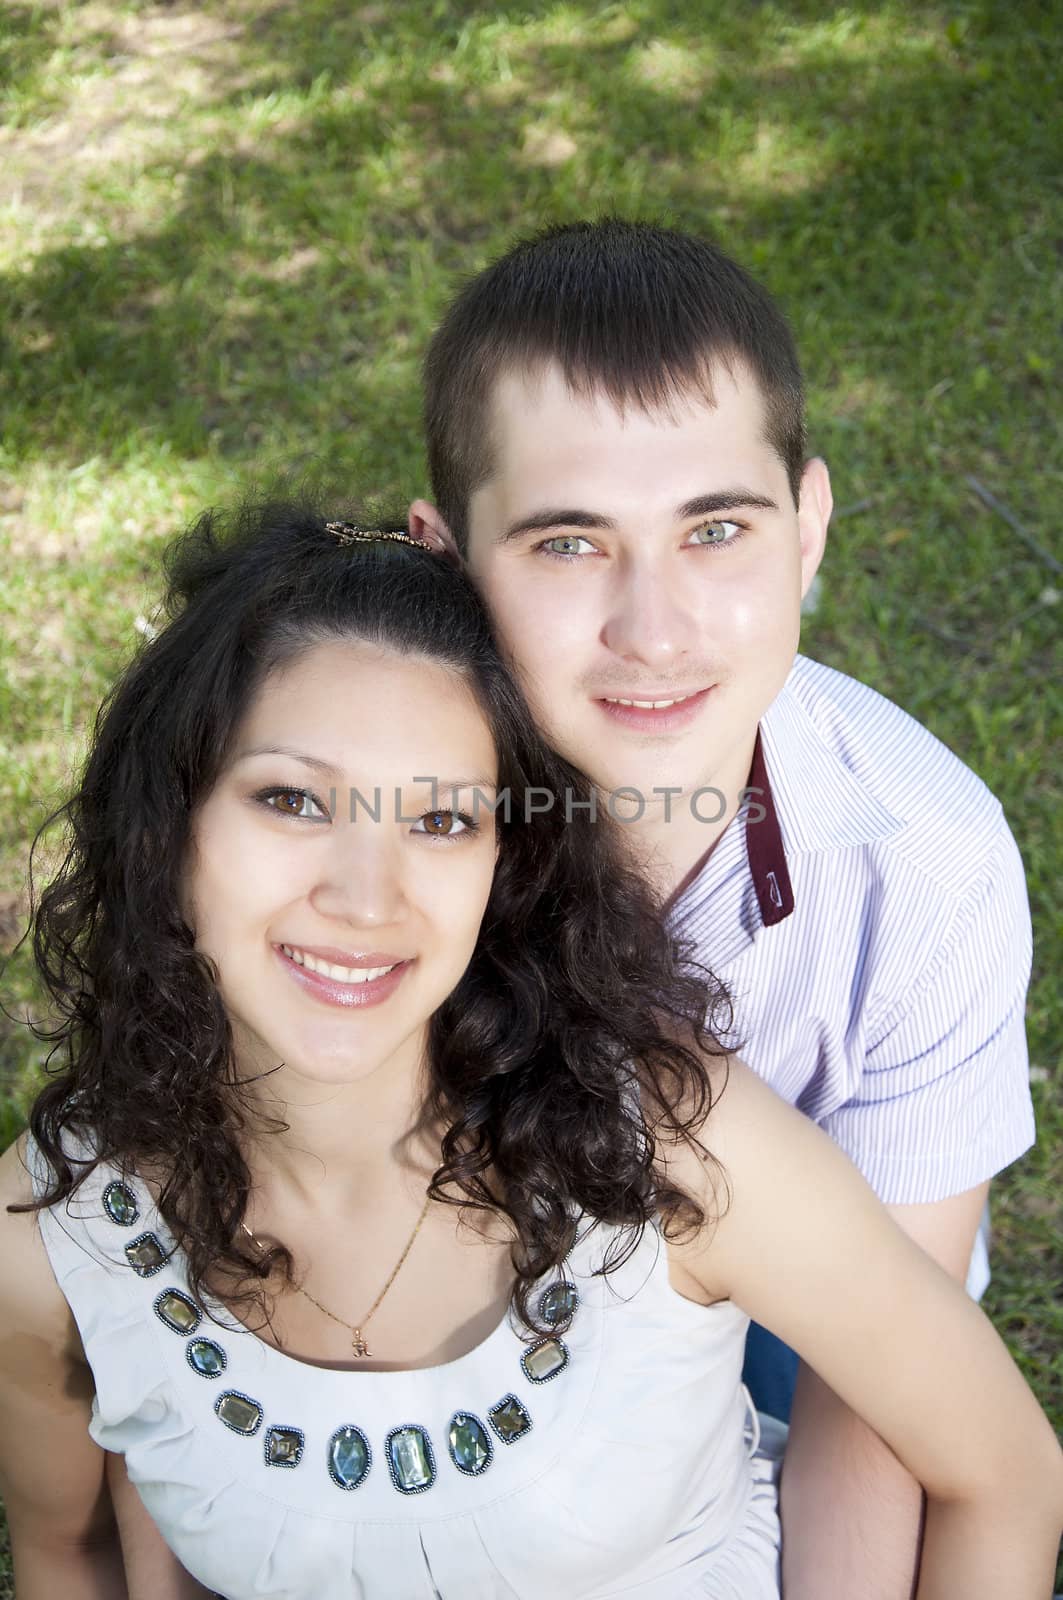 couple embraces in park, green grass background